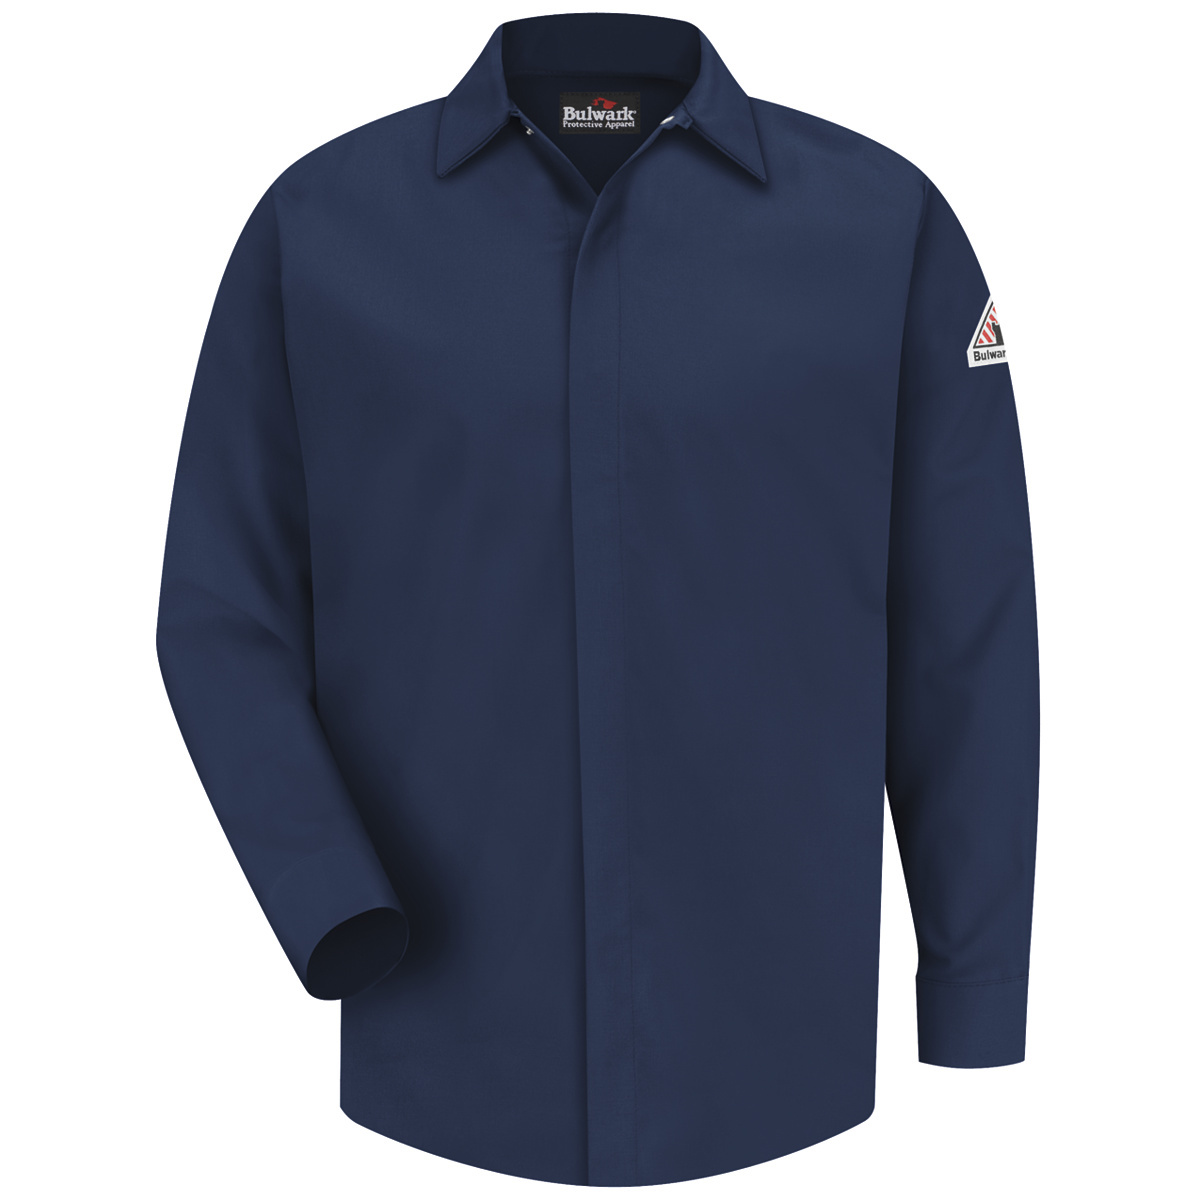 Bulwark® 3X Regular Navy Blue CoolTouch®/Modacrylic/Lyocell/Aramid Flame Resistant Work Shirt With Gripper Front Closure